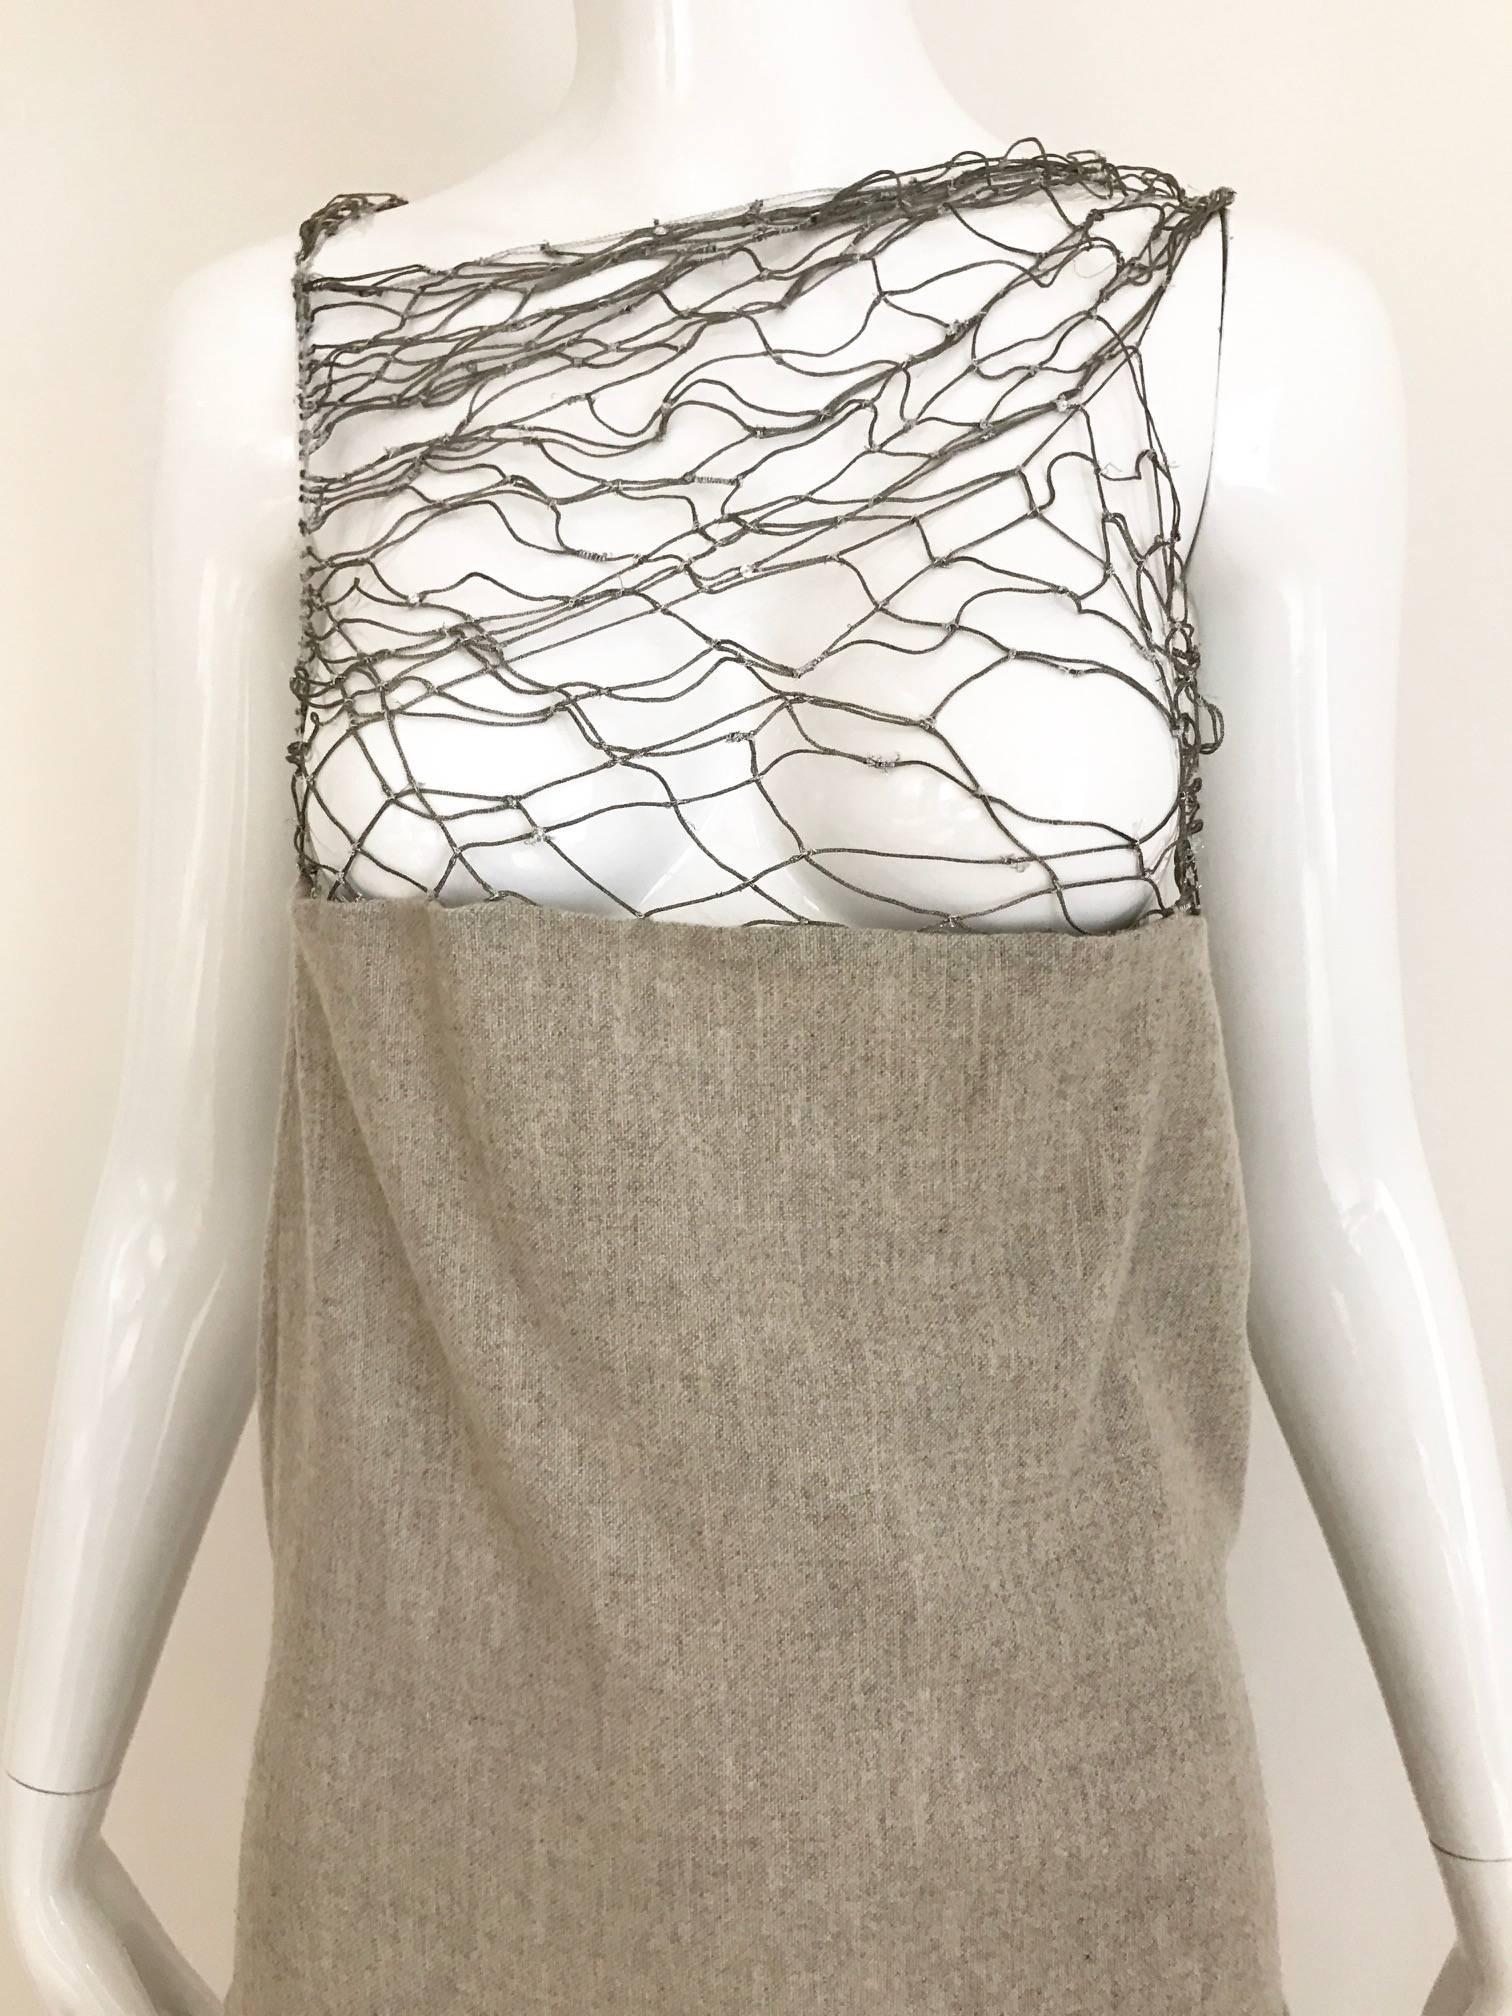 Beautiful Soft Gray Cashmere wool Dress from Narciso Rodriquez. Lattice silver metallic thread on the bust. Slightly A line skirt. 
This dress marked size 12 but it fit size 6 or 8 Medium ( see measurement)
Bust: 36 inch
Waist: 30 inch
Hip: 36 inch